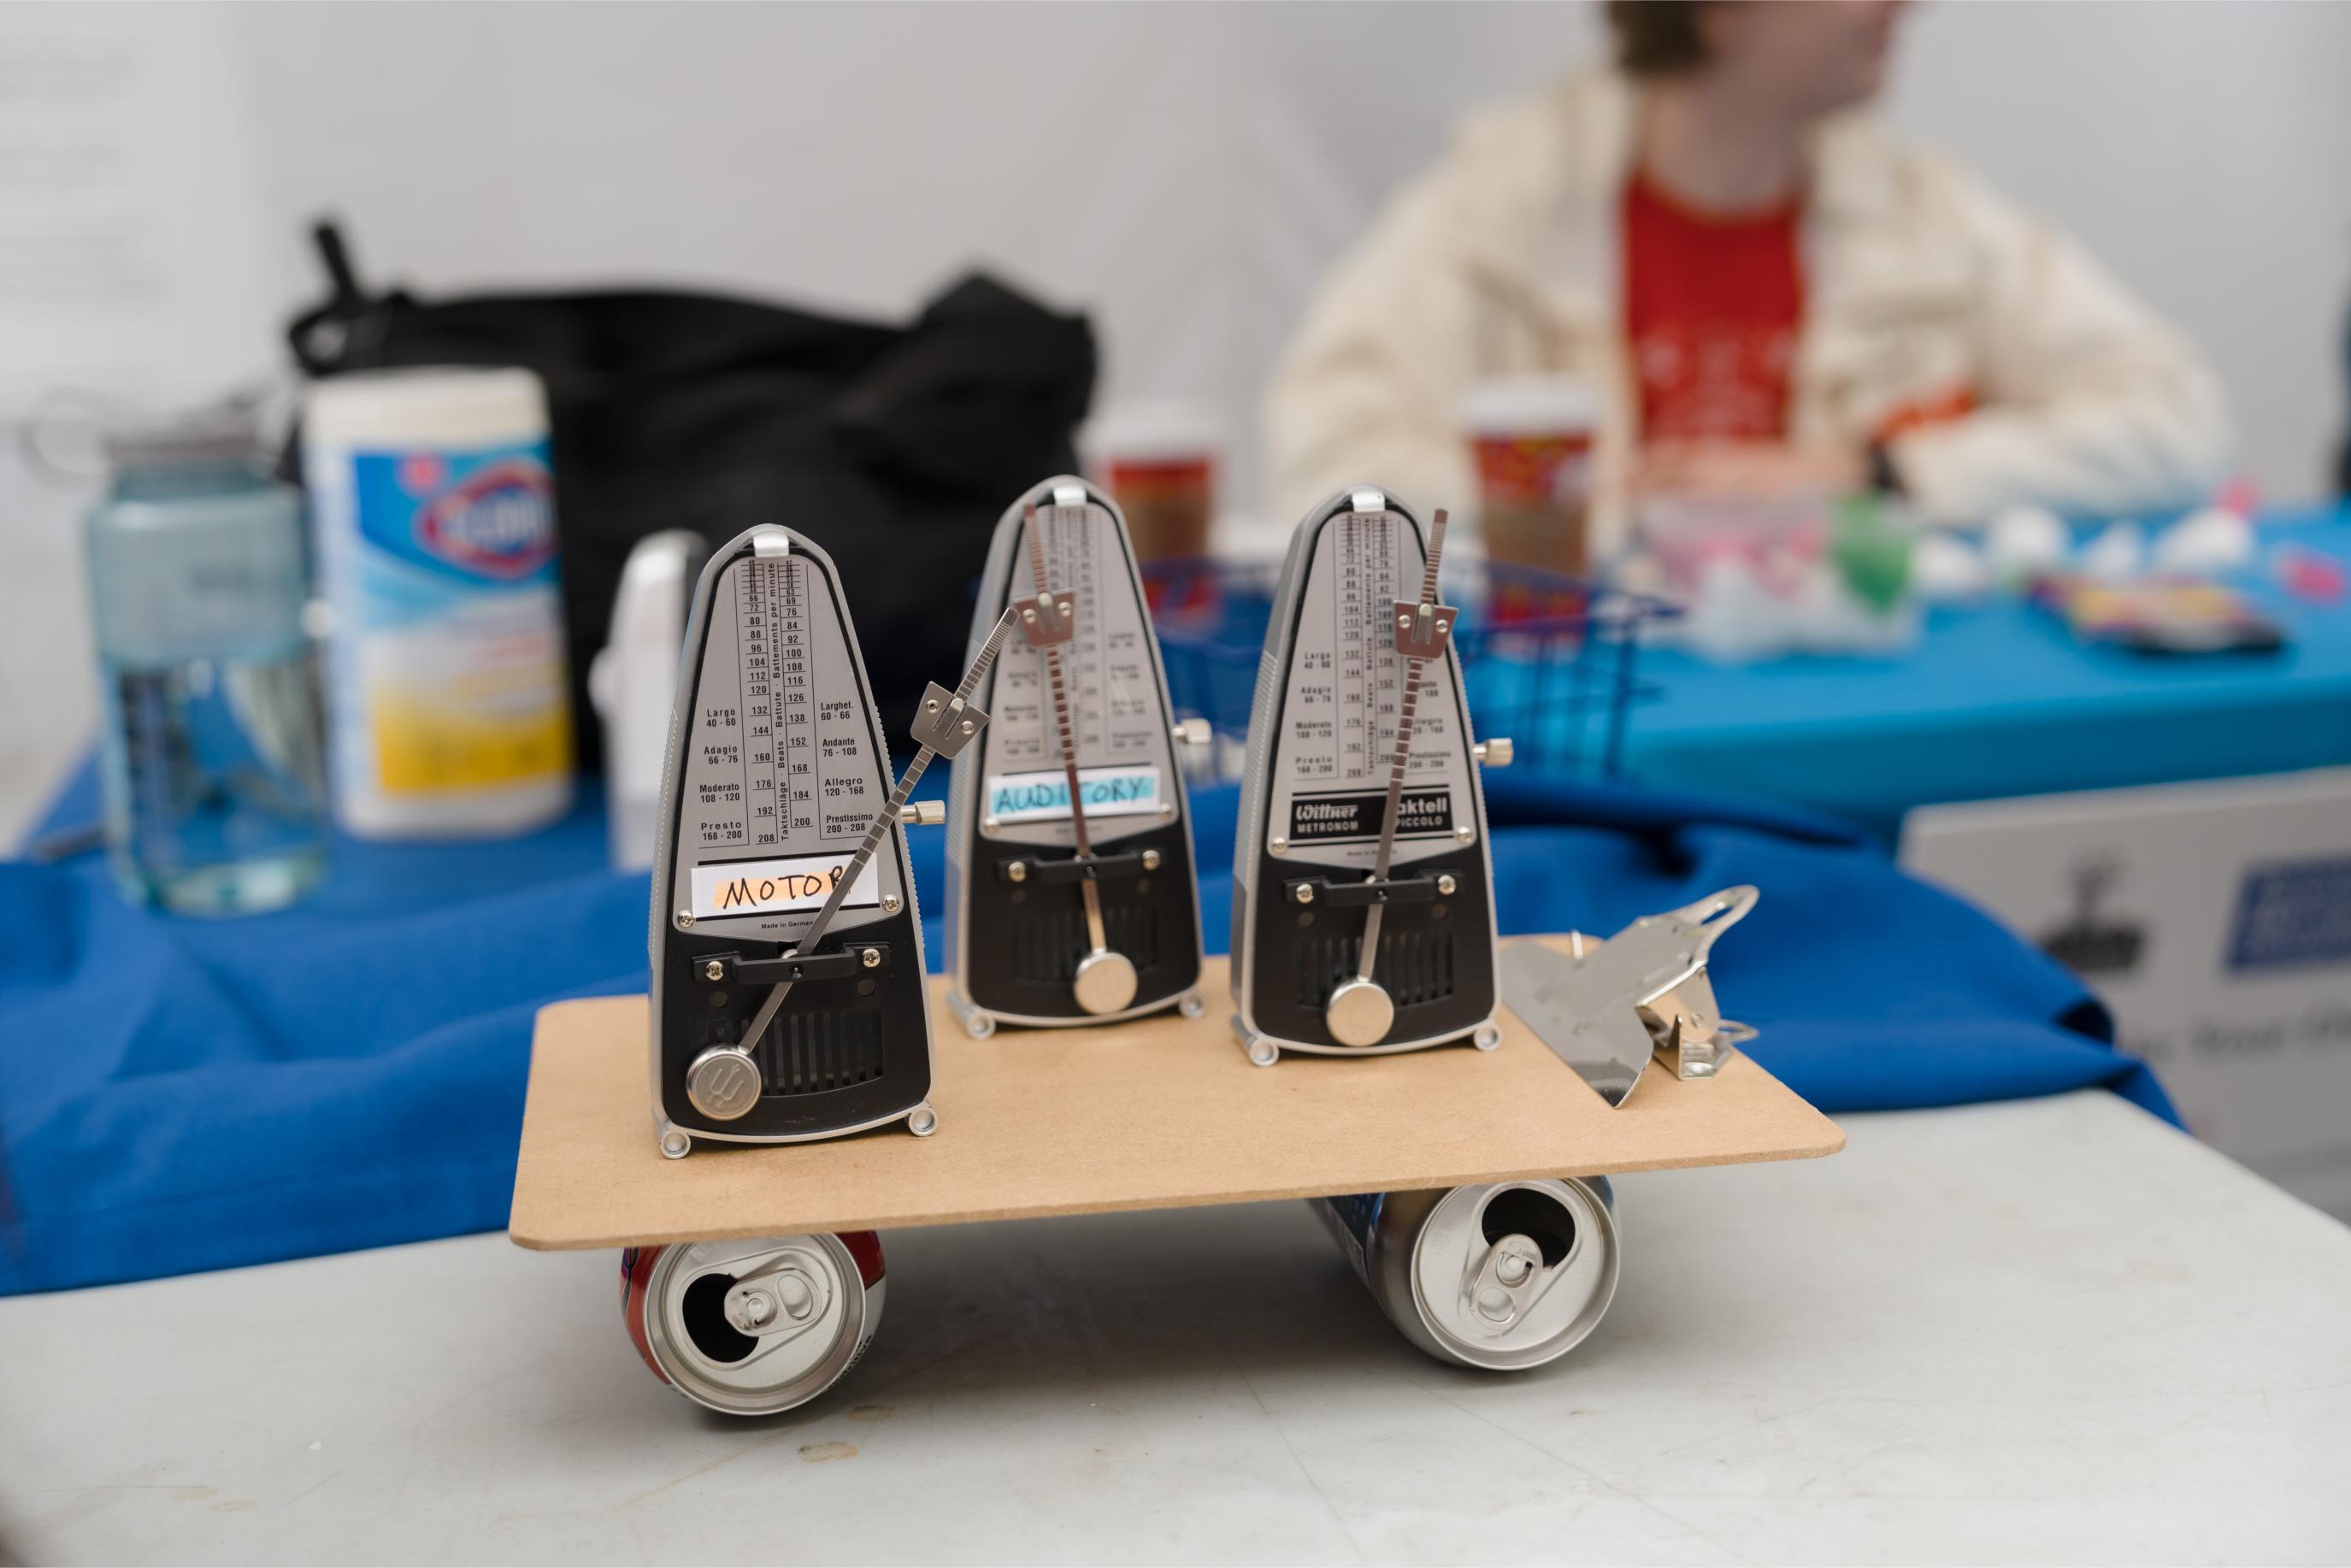 Three tiny metronomes with two labelled "motor" and "auditory" on a clipboard were balanced by two soda cans at the Mind Games Booth.